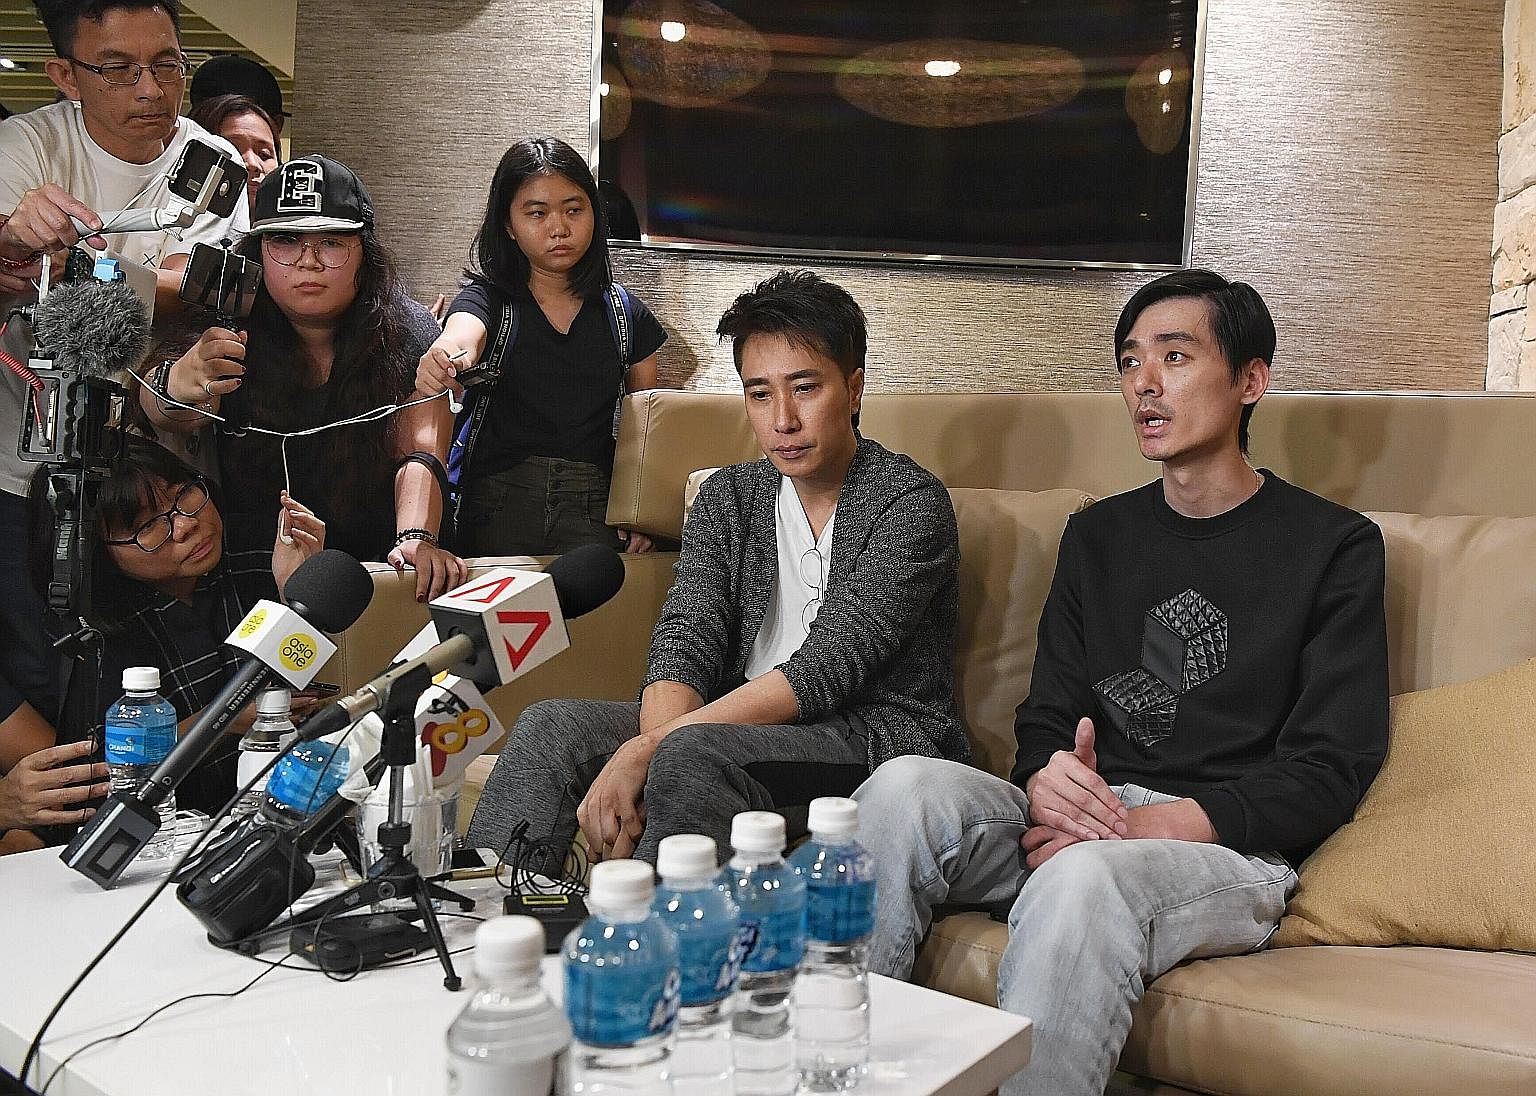 CFC Aloysius Pang was with two other personnel inside a howitzer when he was injured last Saturday. Singaporean actor Aloysius Pang's manager Dasmond Koh (left) and elder brother Kenny Pang speaking to the media at Changi Airport yesterday. Mr Koh sa